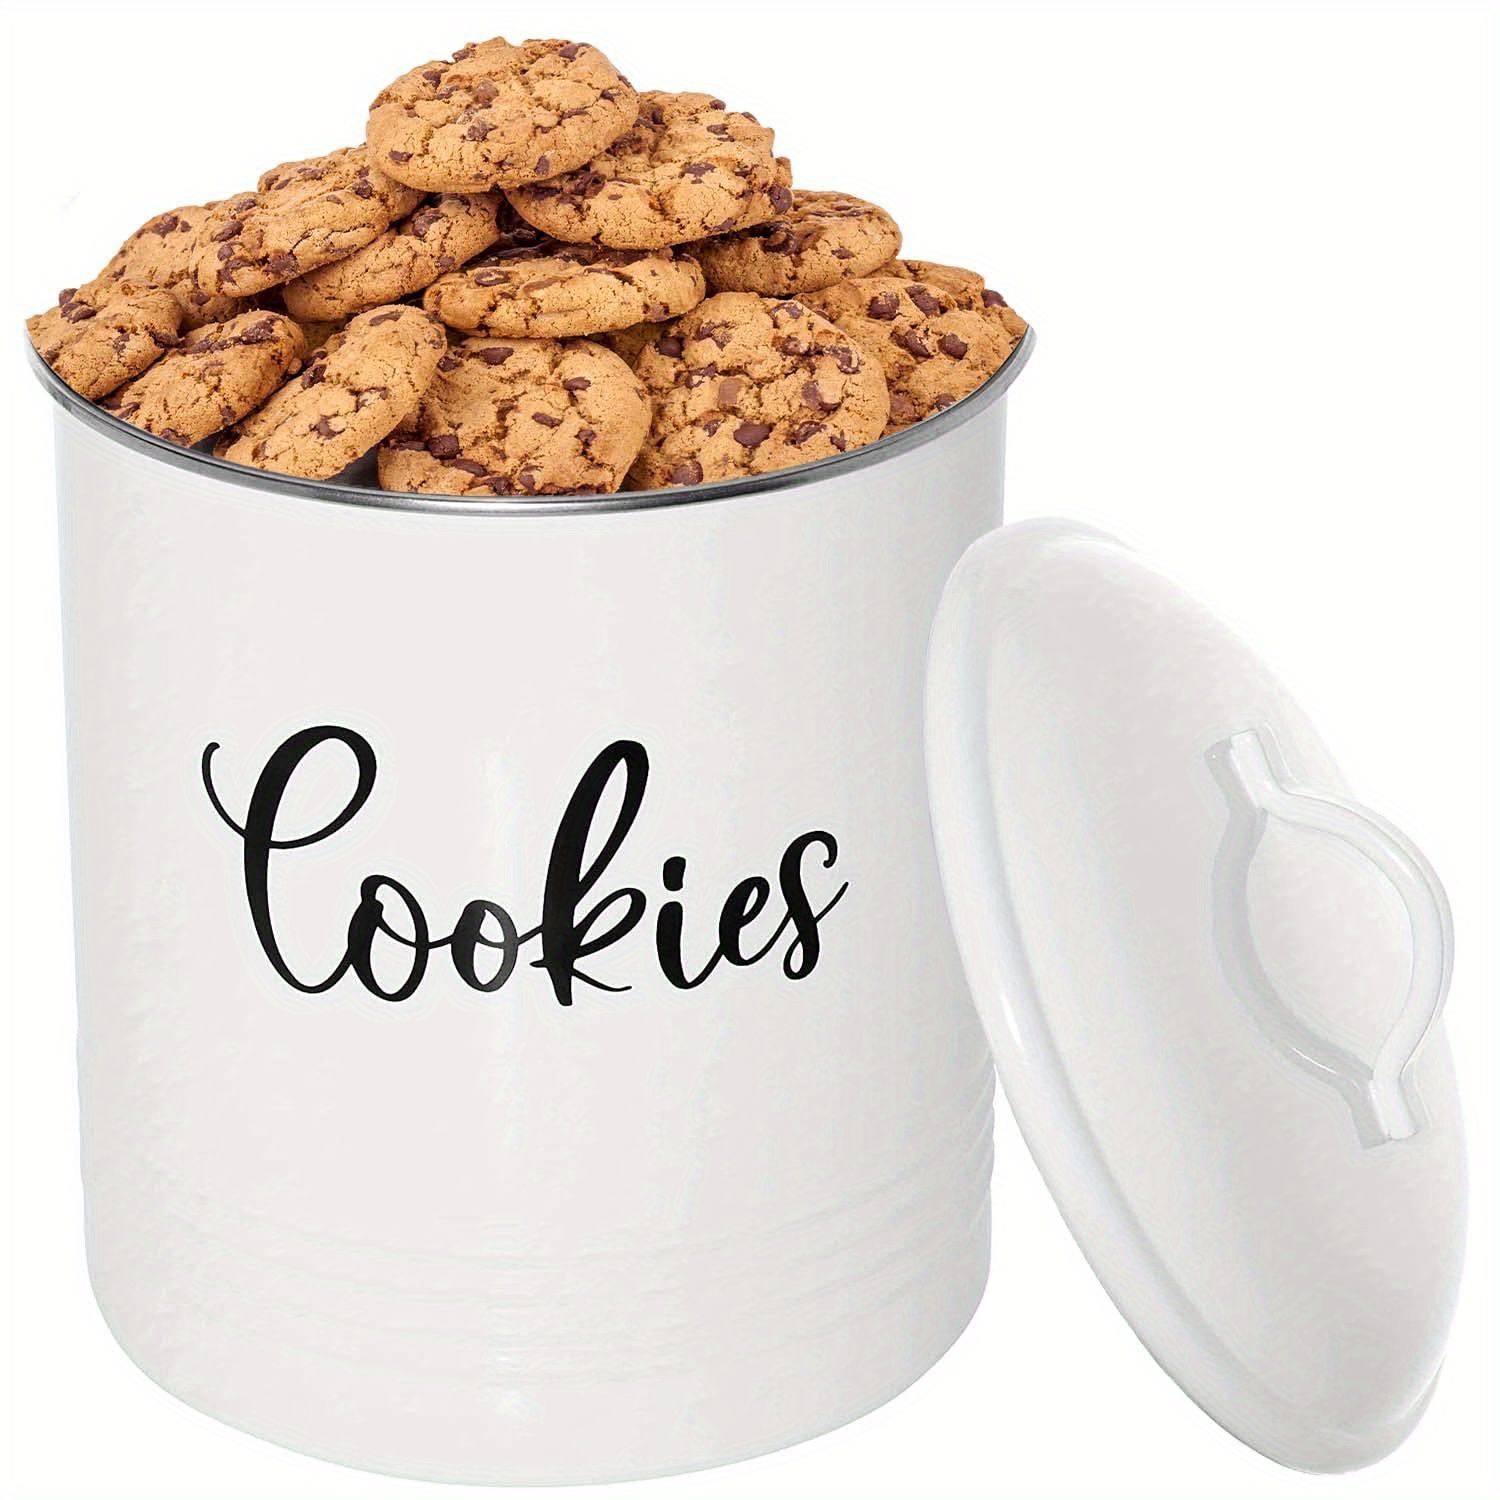 Kovot White Vintage Farmhouse Cookie Jar Airtight Food Storage Container with Lid for Cookies Biscuits Baked Treats Snacks Gift for Housewarming Birth